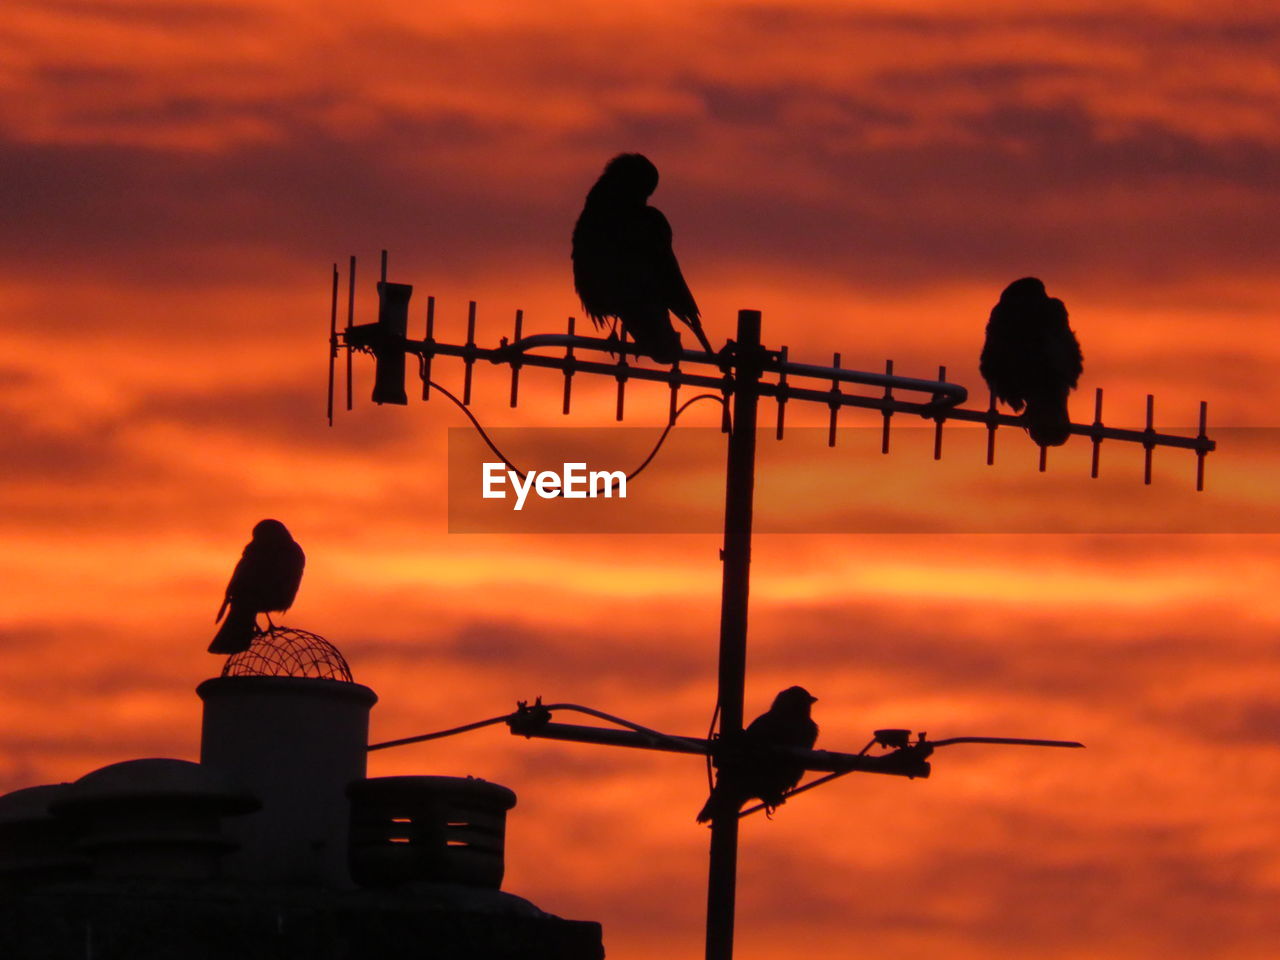 sunset, sky, silhouette, bird, evening, cloud, dawn, animal themes, animal, nature, communication, no people, animal wildlife, wildlife, architecture, orange color, perching, afterglow, outdoors, group of animals, technology, dramatic sky, built structure, red sky at morning, weather vane